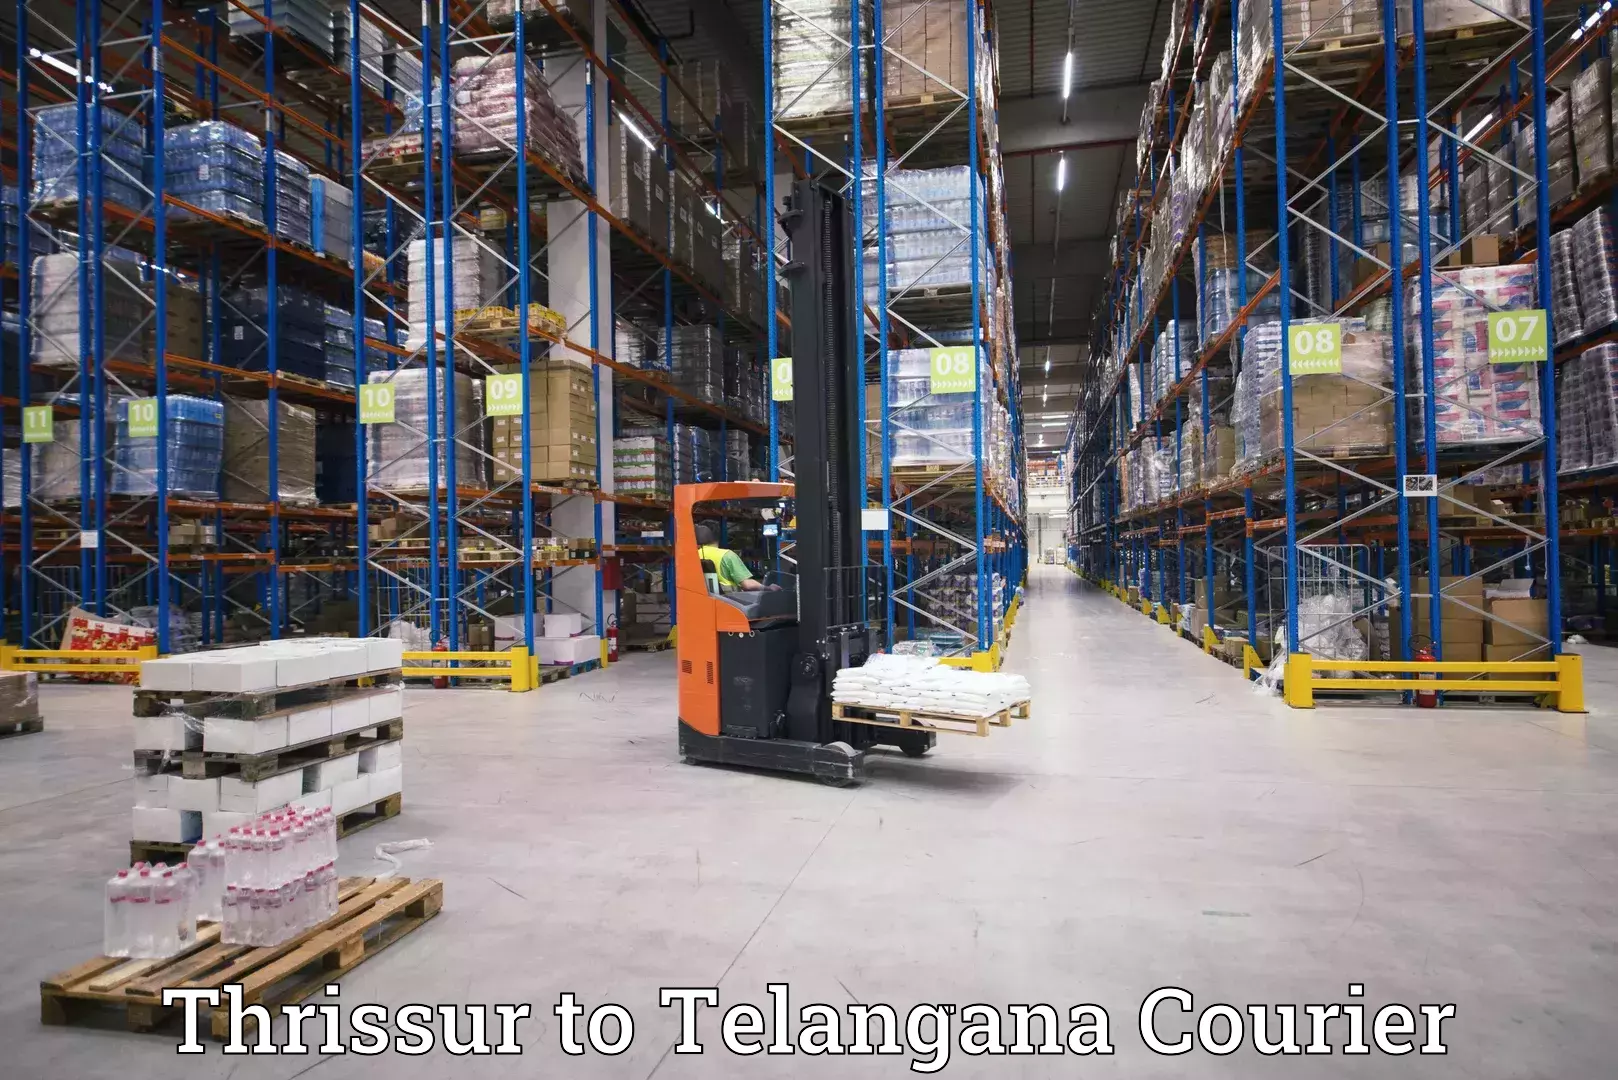 Sustainable courier practices Thrissur to Telangana